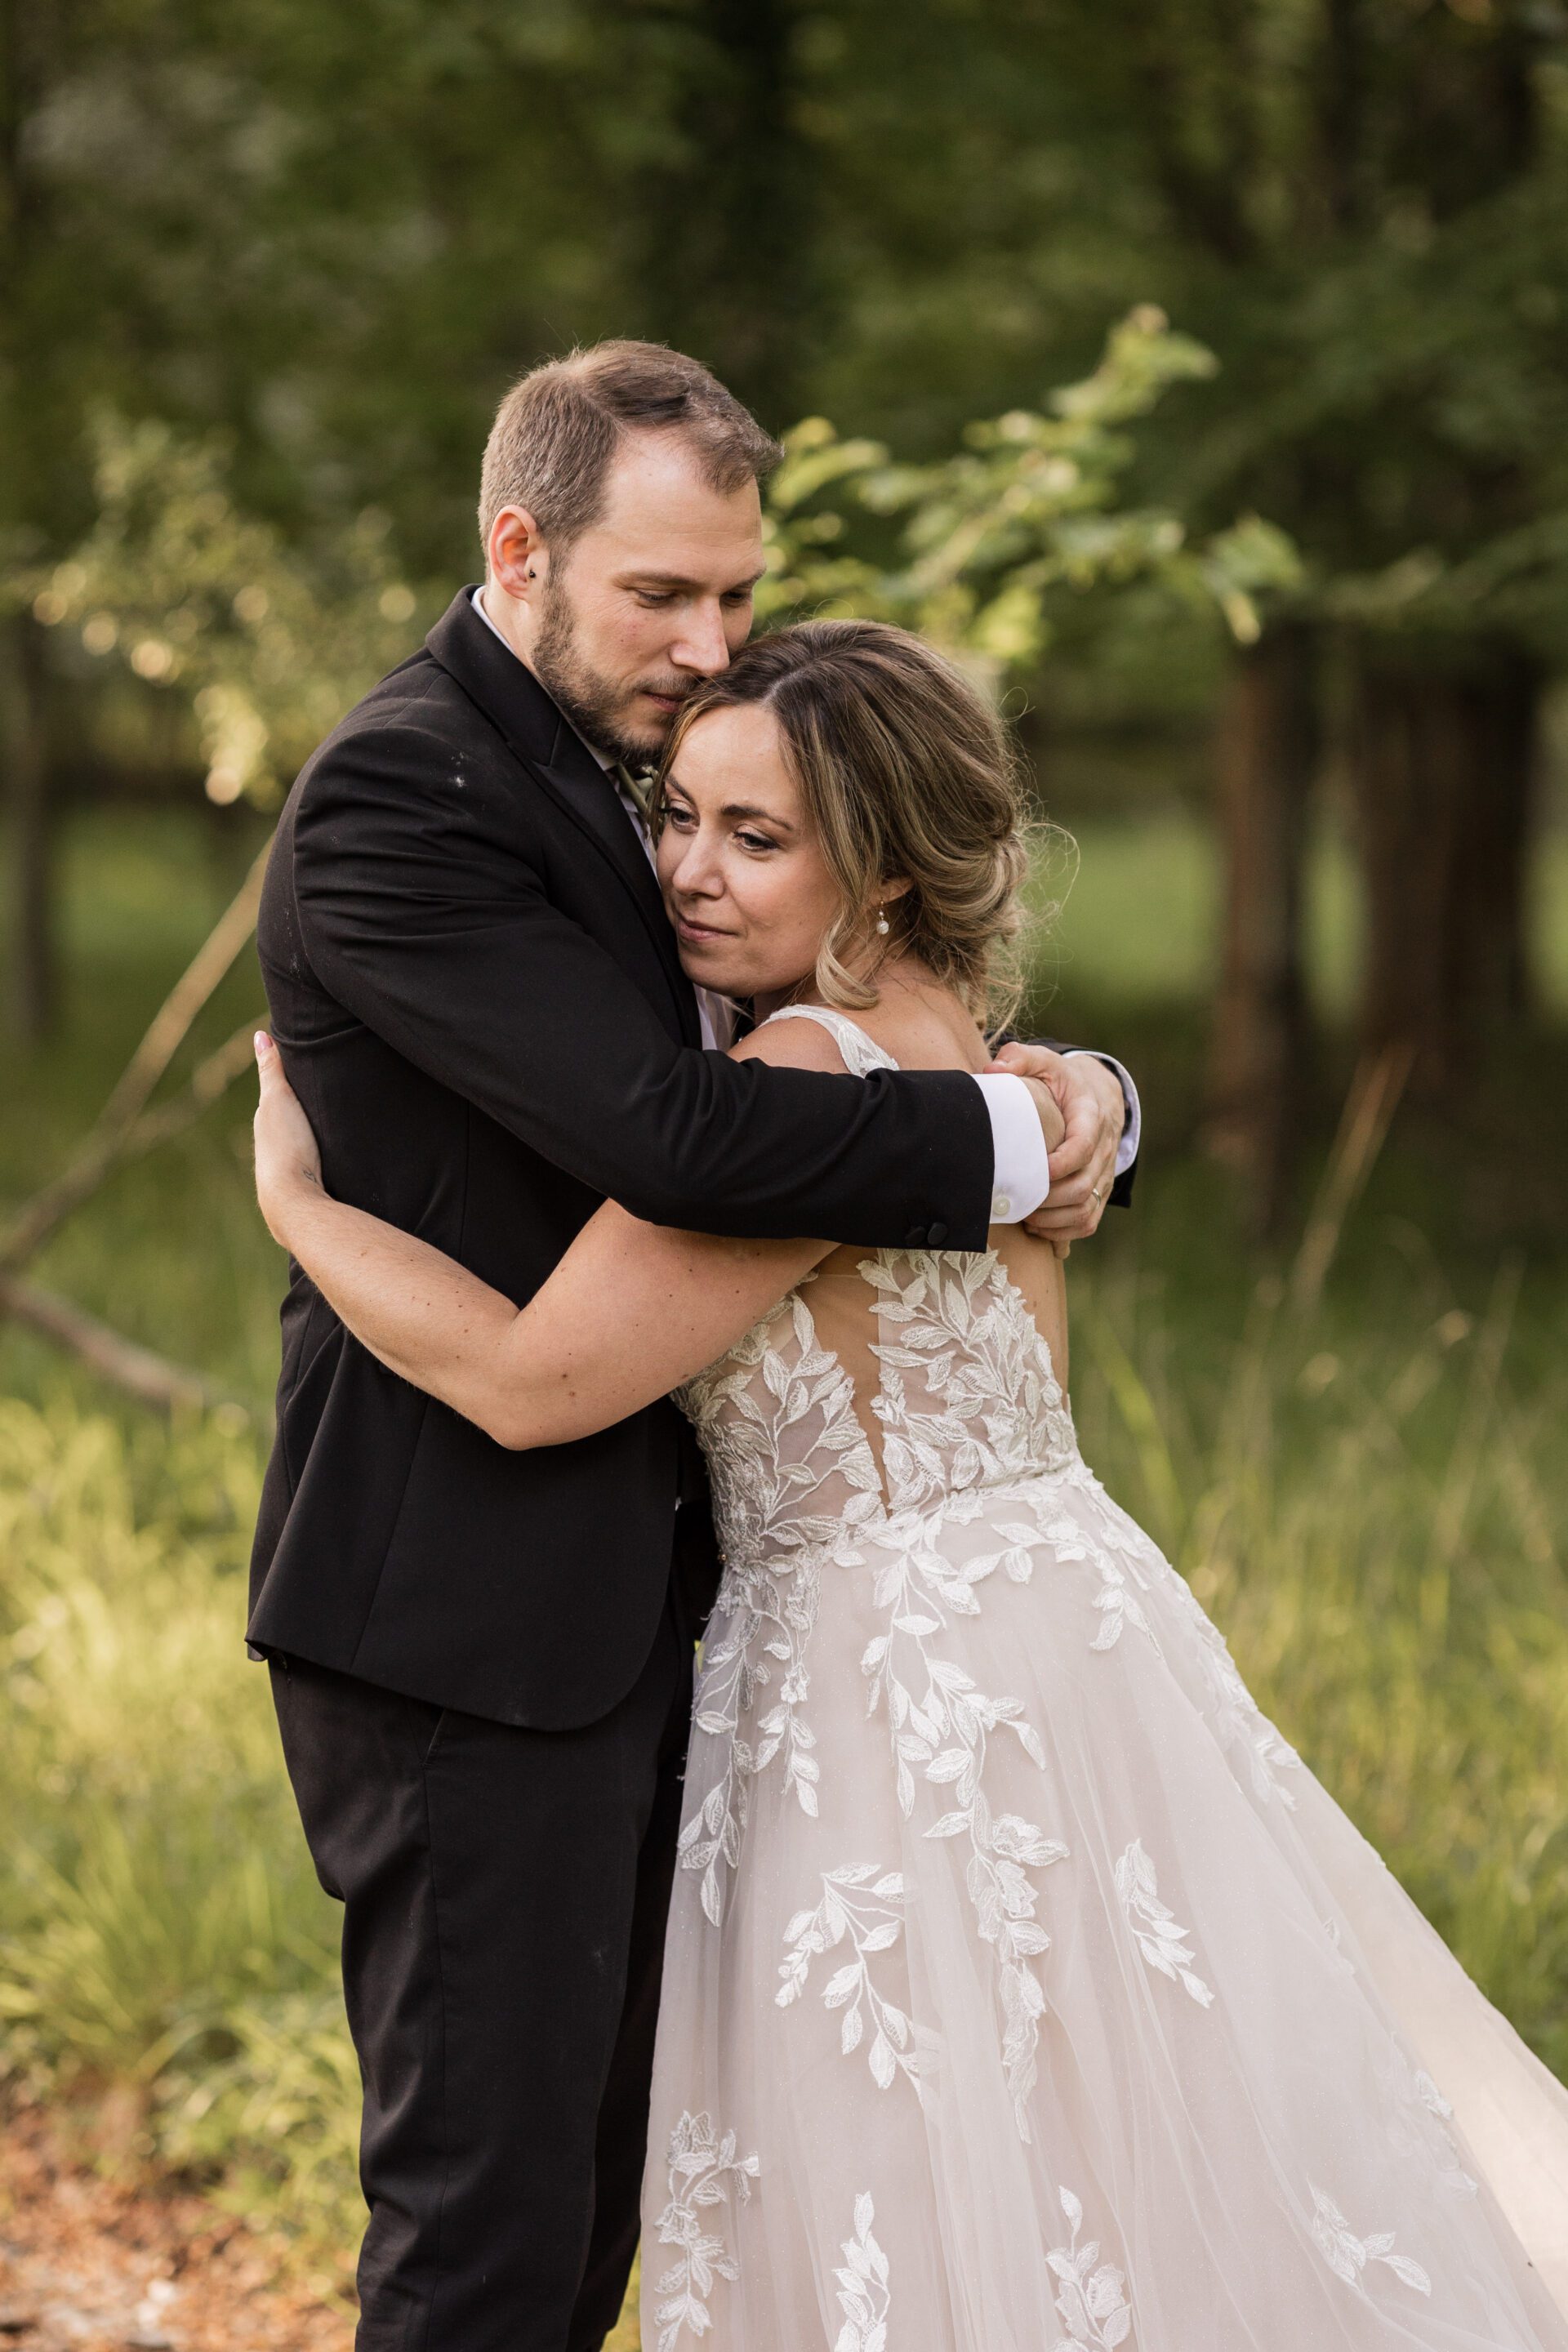 The bride and groom share an embrace during their barn wedding